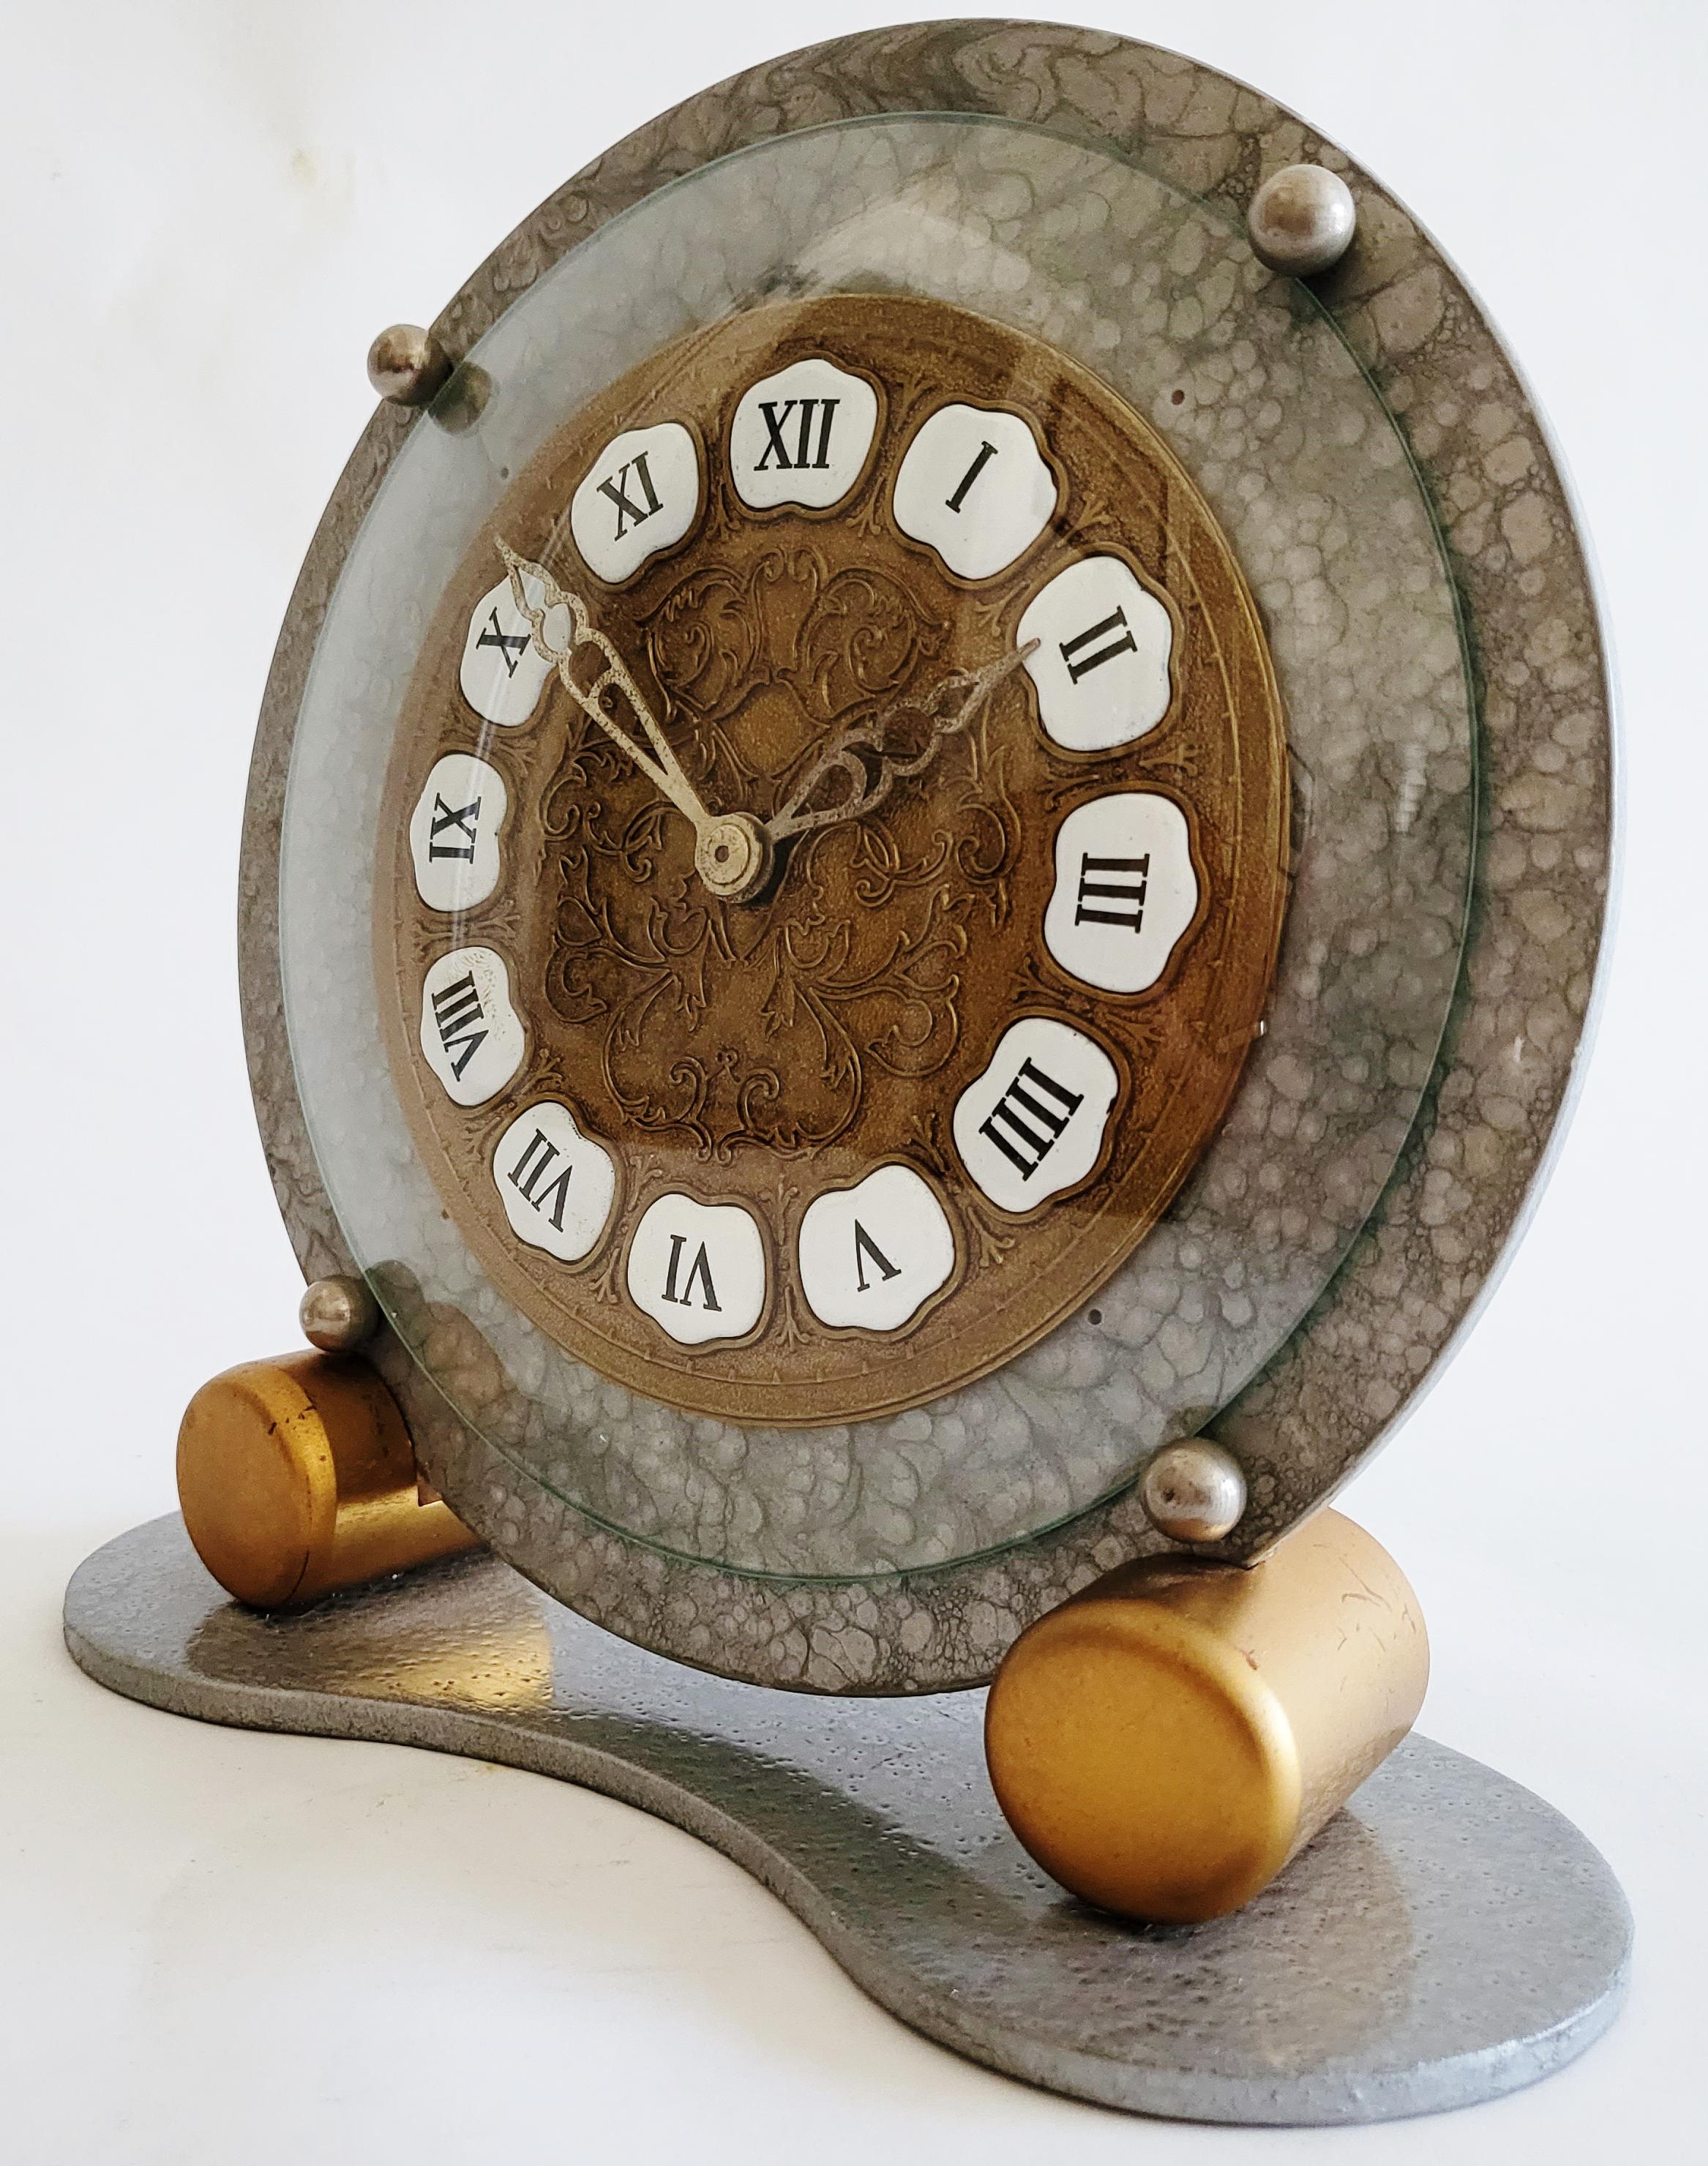 This eccentrically designed English mechanical table clock is by the celebrated London clockmakers, Davall of Clerkenwell. Its design is a combination of geometric Art Deco with Baroque flourishes!! The floral brass clock face and painted porcelain